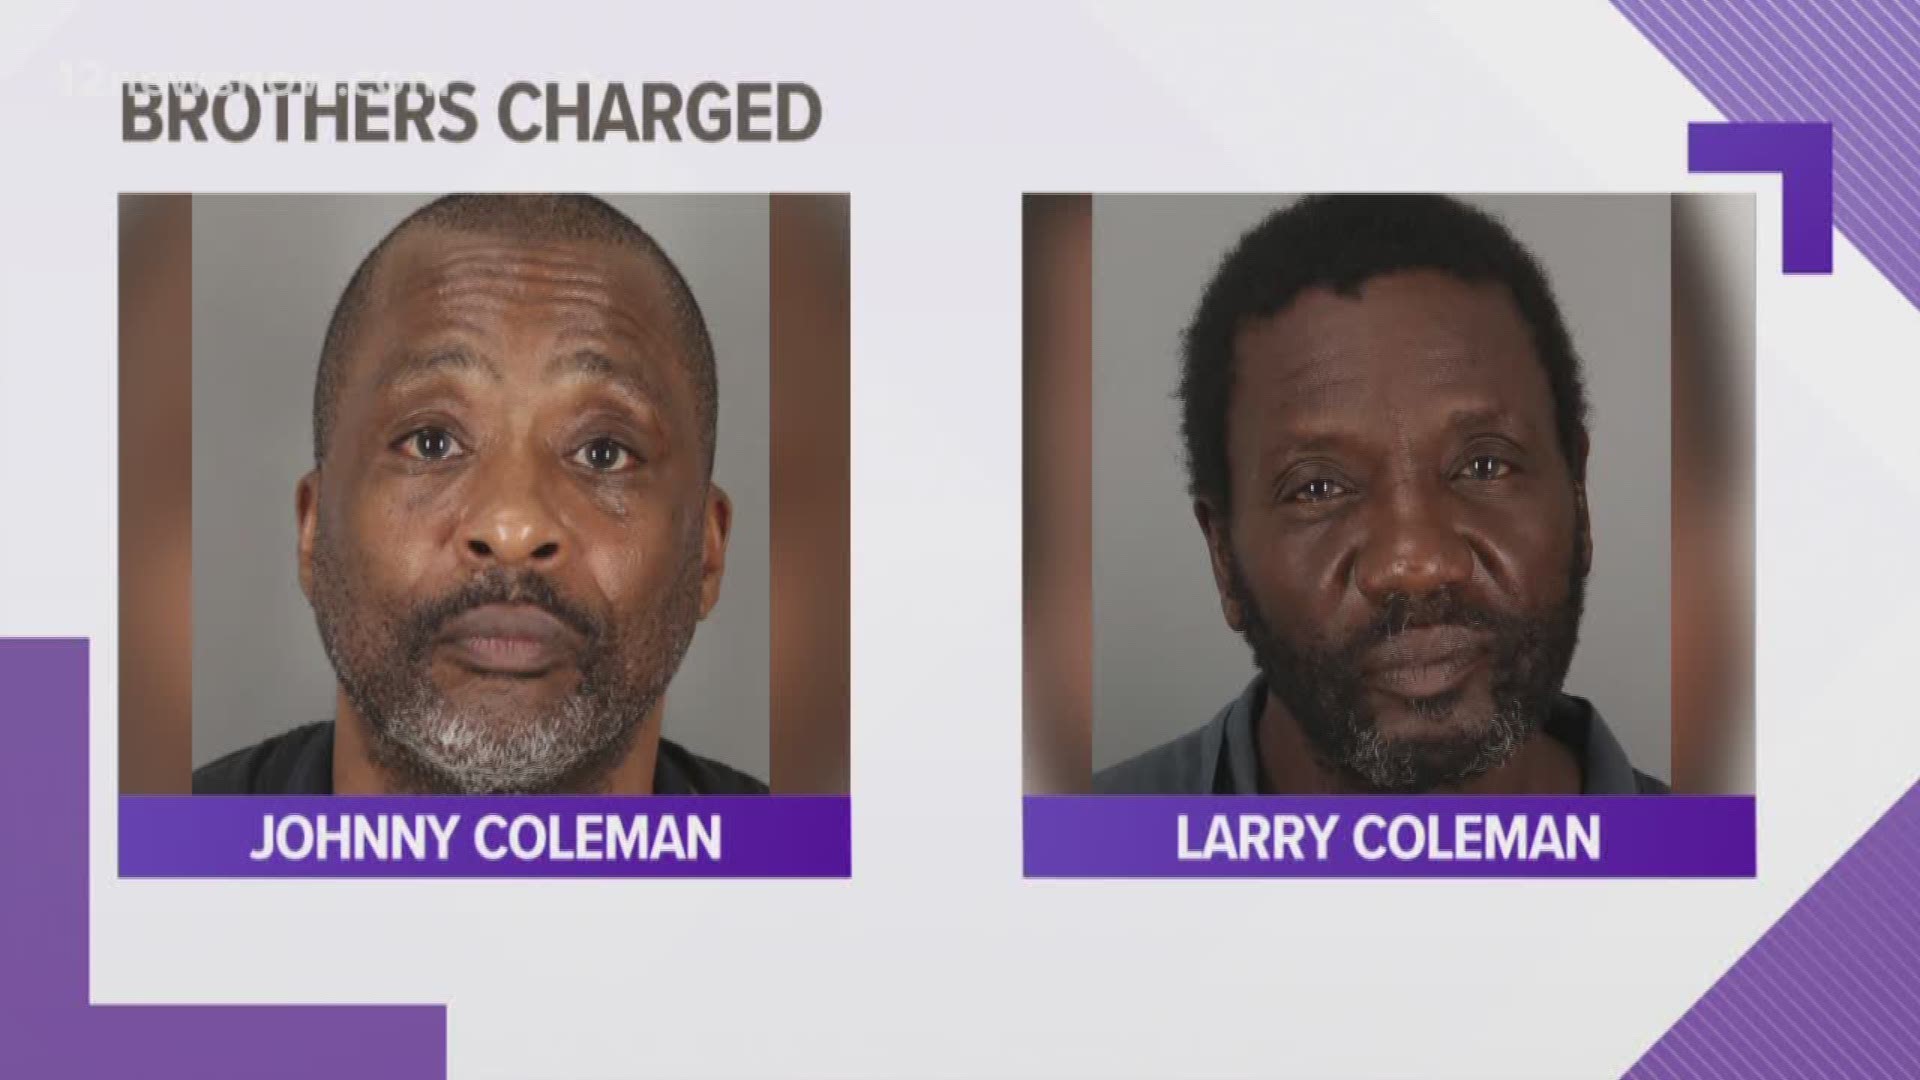 District Attorney Bob Wortham said more could be charged in connection with the case.